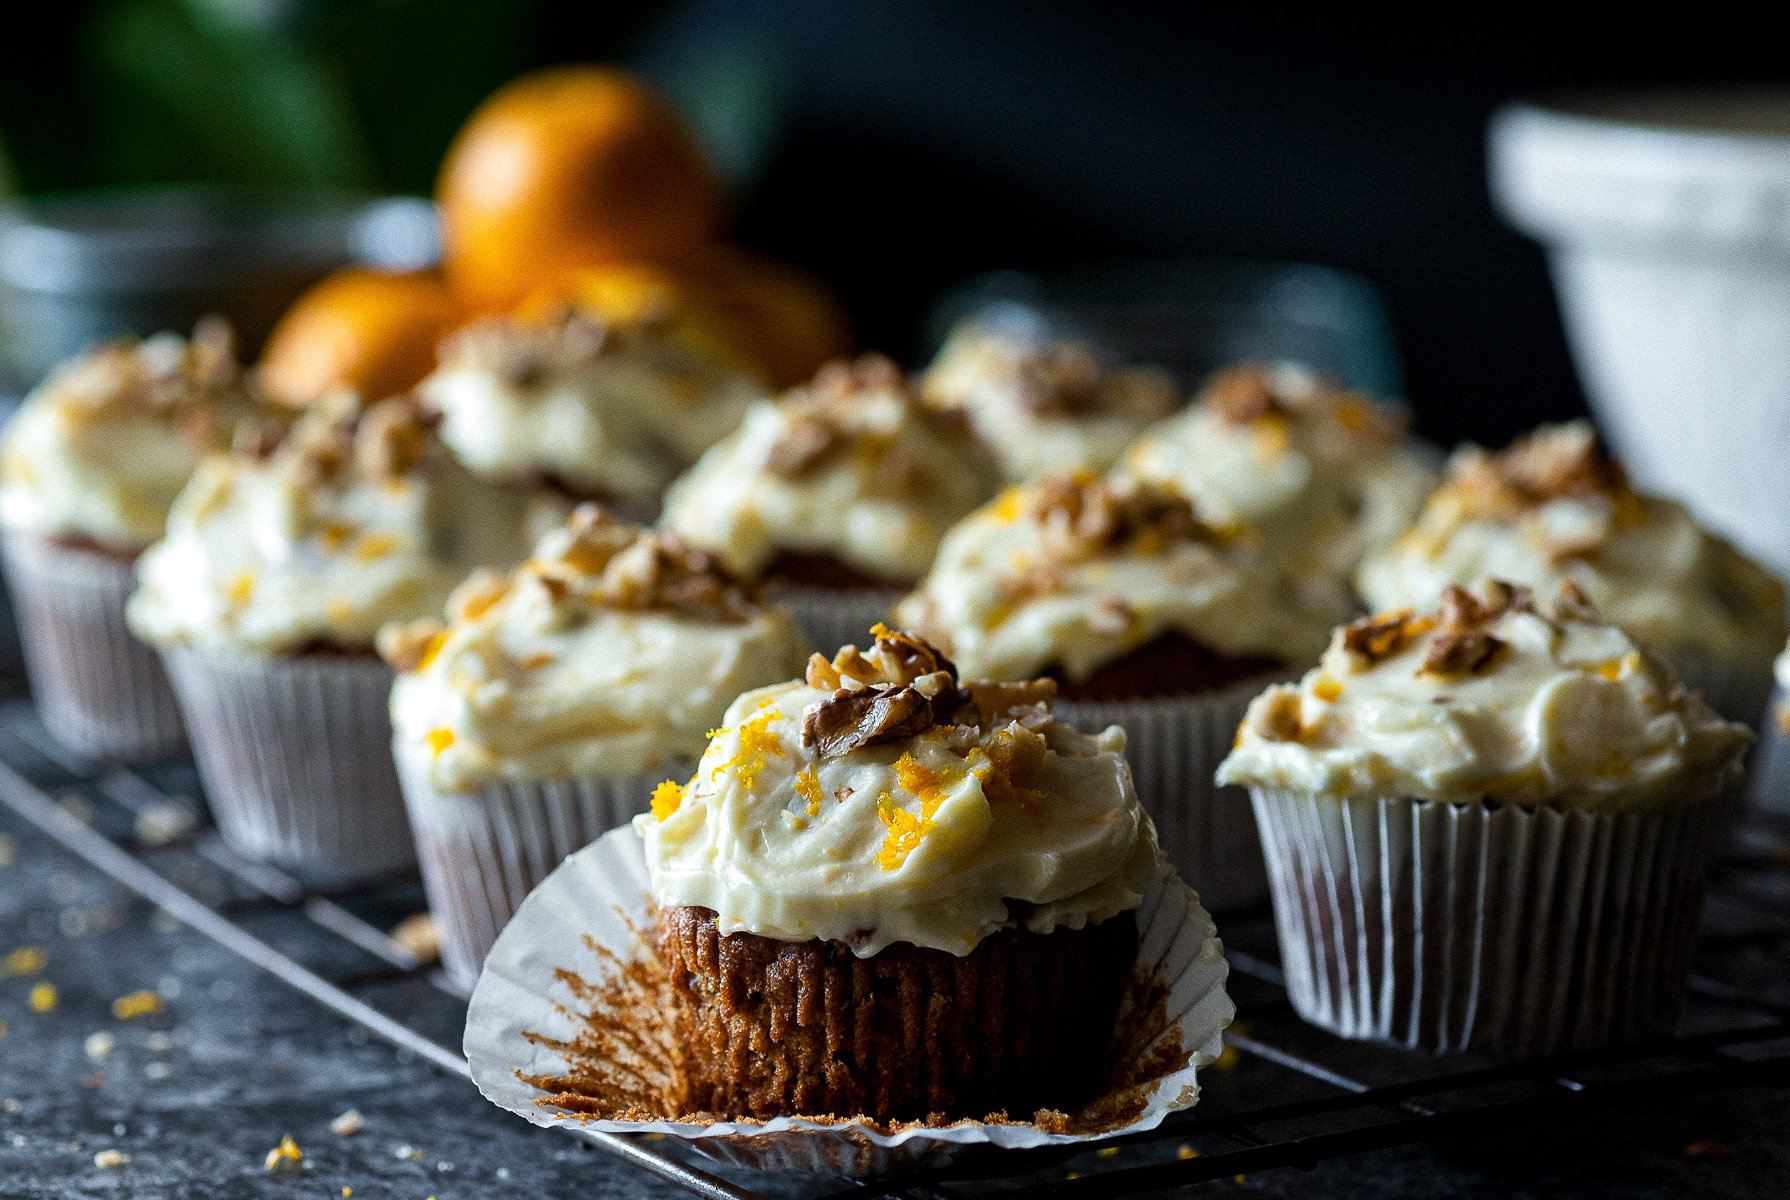 Thackerys Cookery School - Hikaru Funnell - Carrot Cake Muffins - Matte Boards - Food Photography - 7-7-2020 - 23-2.jpg